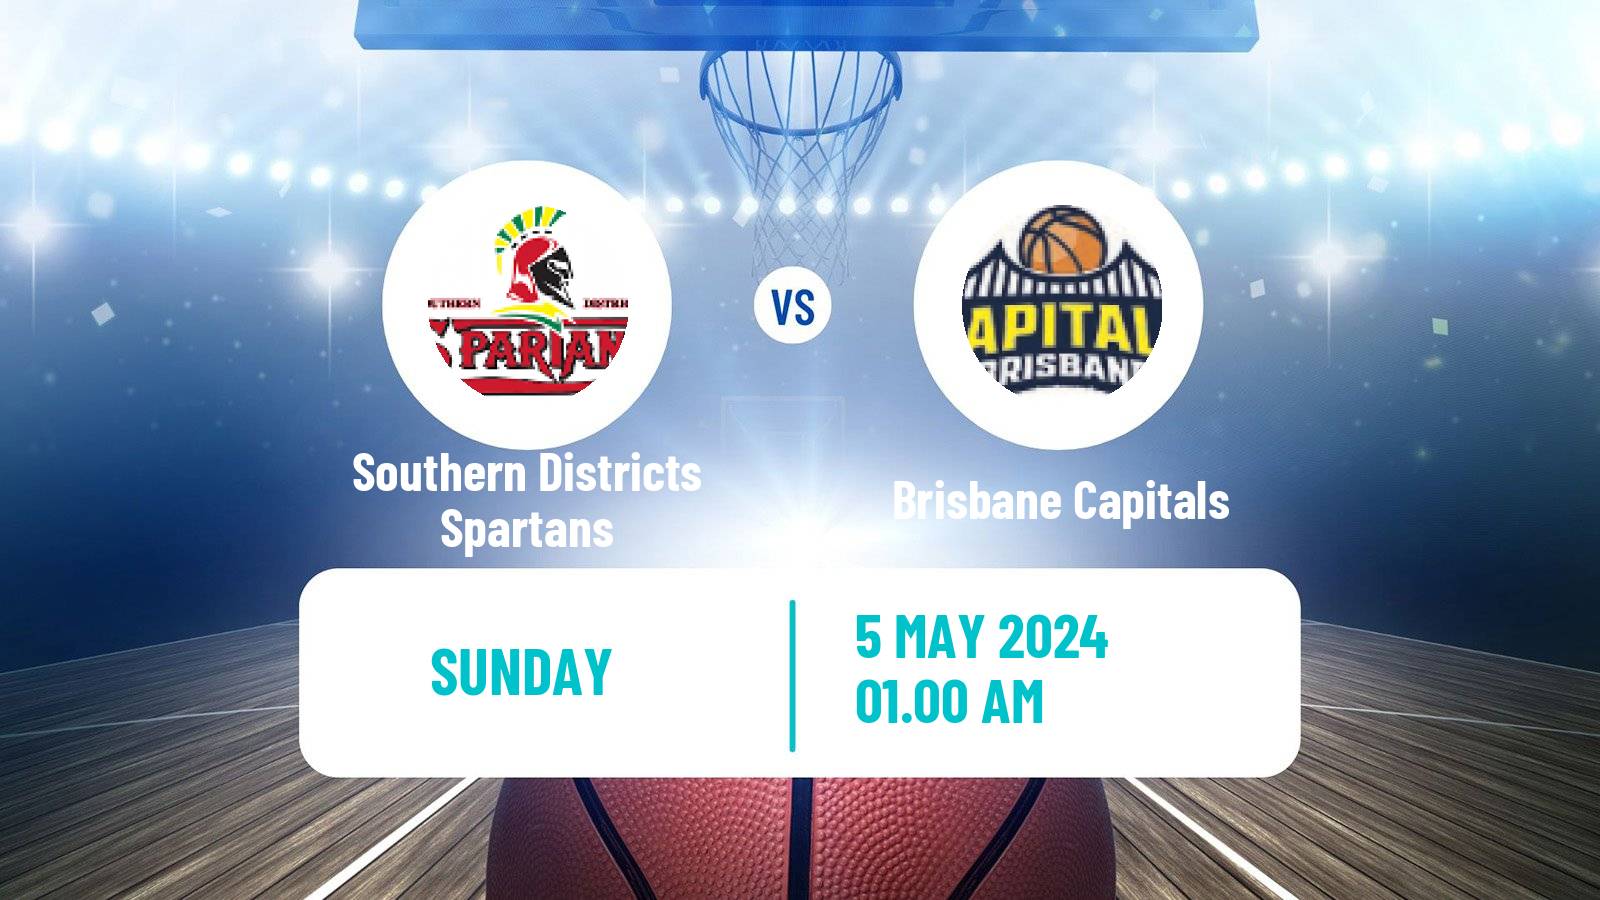 Basketball Australian NBL1 North Southern Districts Spartans - Brisbane Capitals